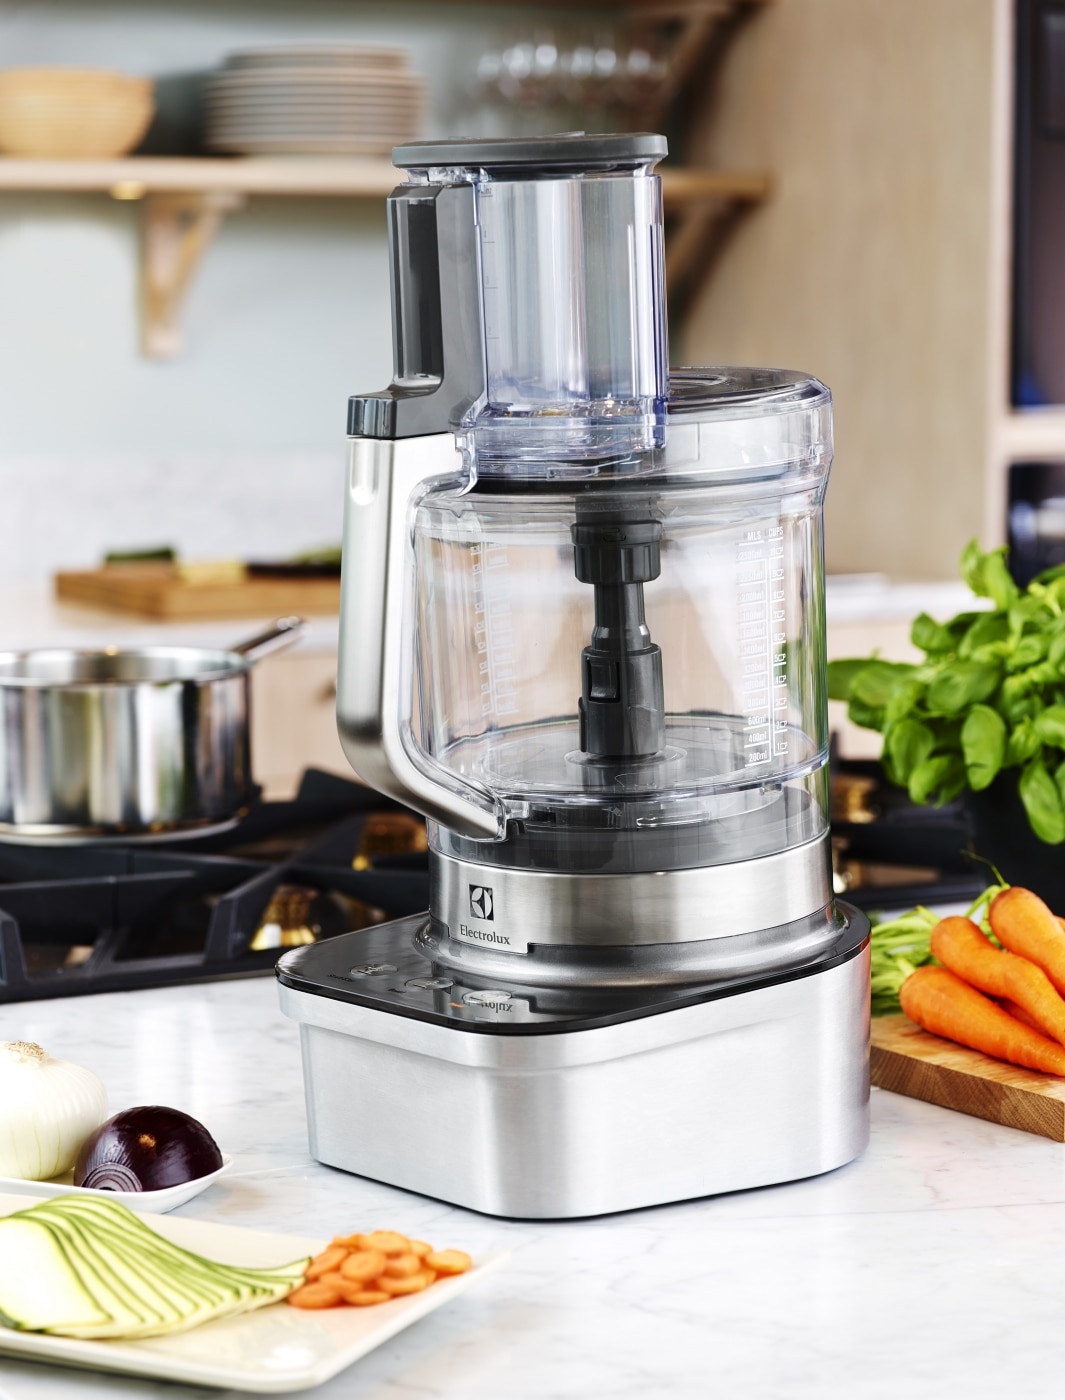 Electrolux launches Master 9 connected blender - Home Appliances World